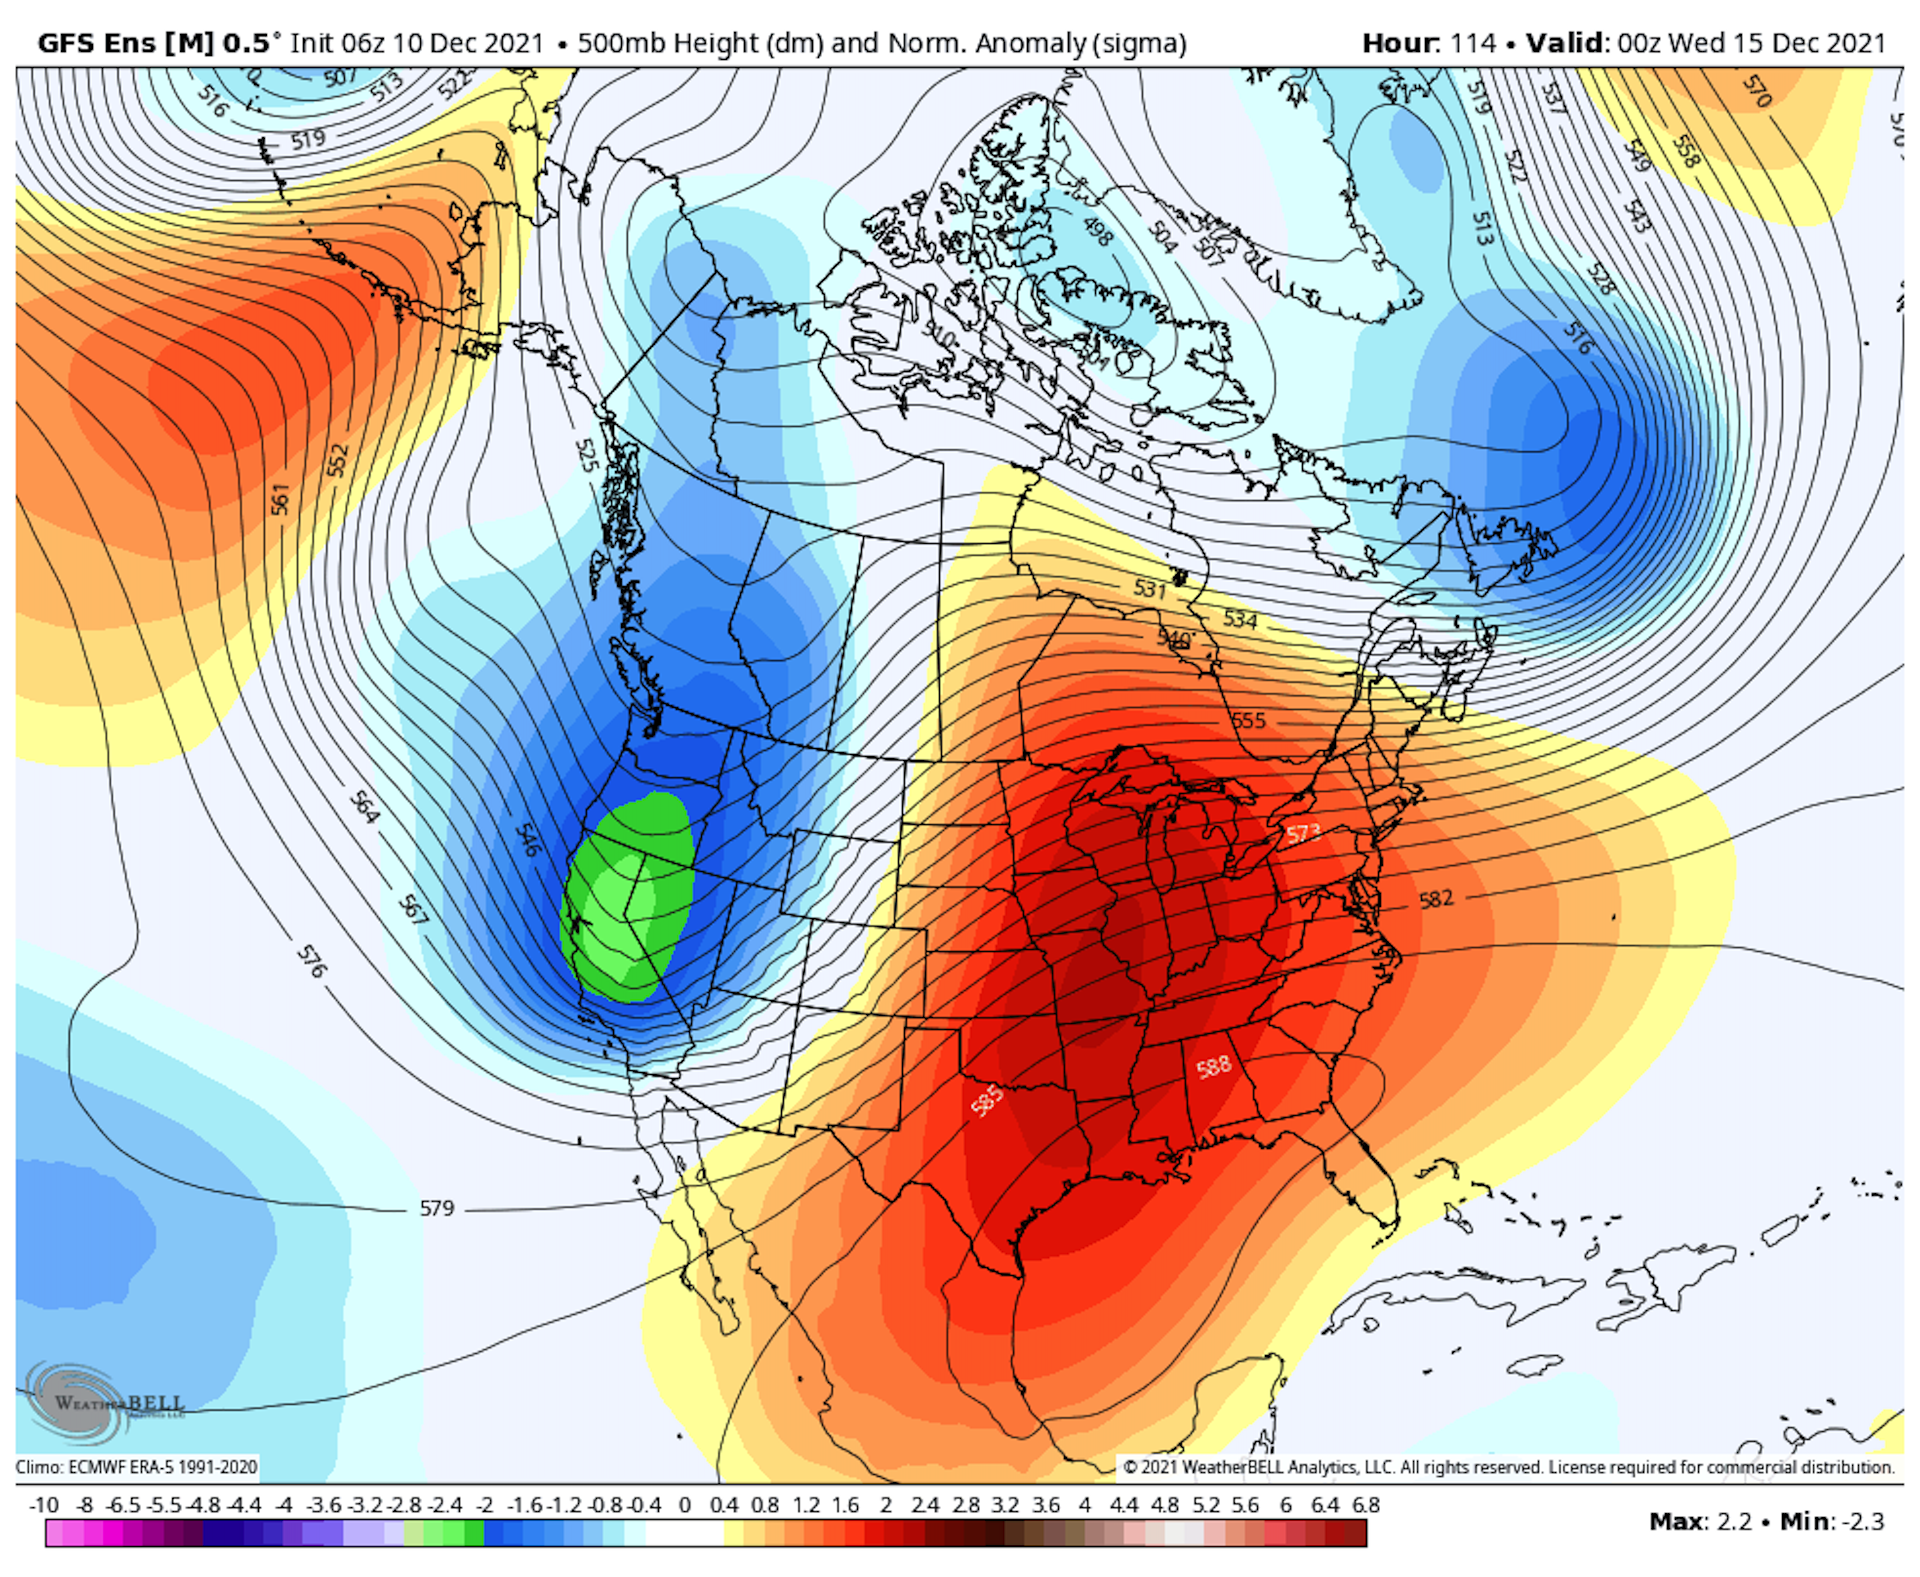 Map showing the huge area of unusually high pressure and warm air aloft (red) on Dec. 15, 2021.